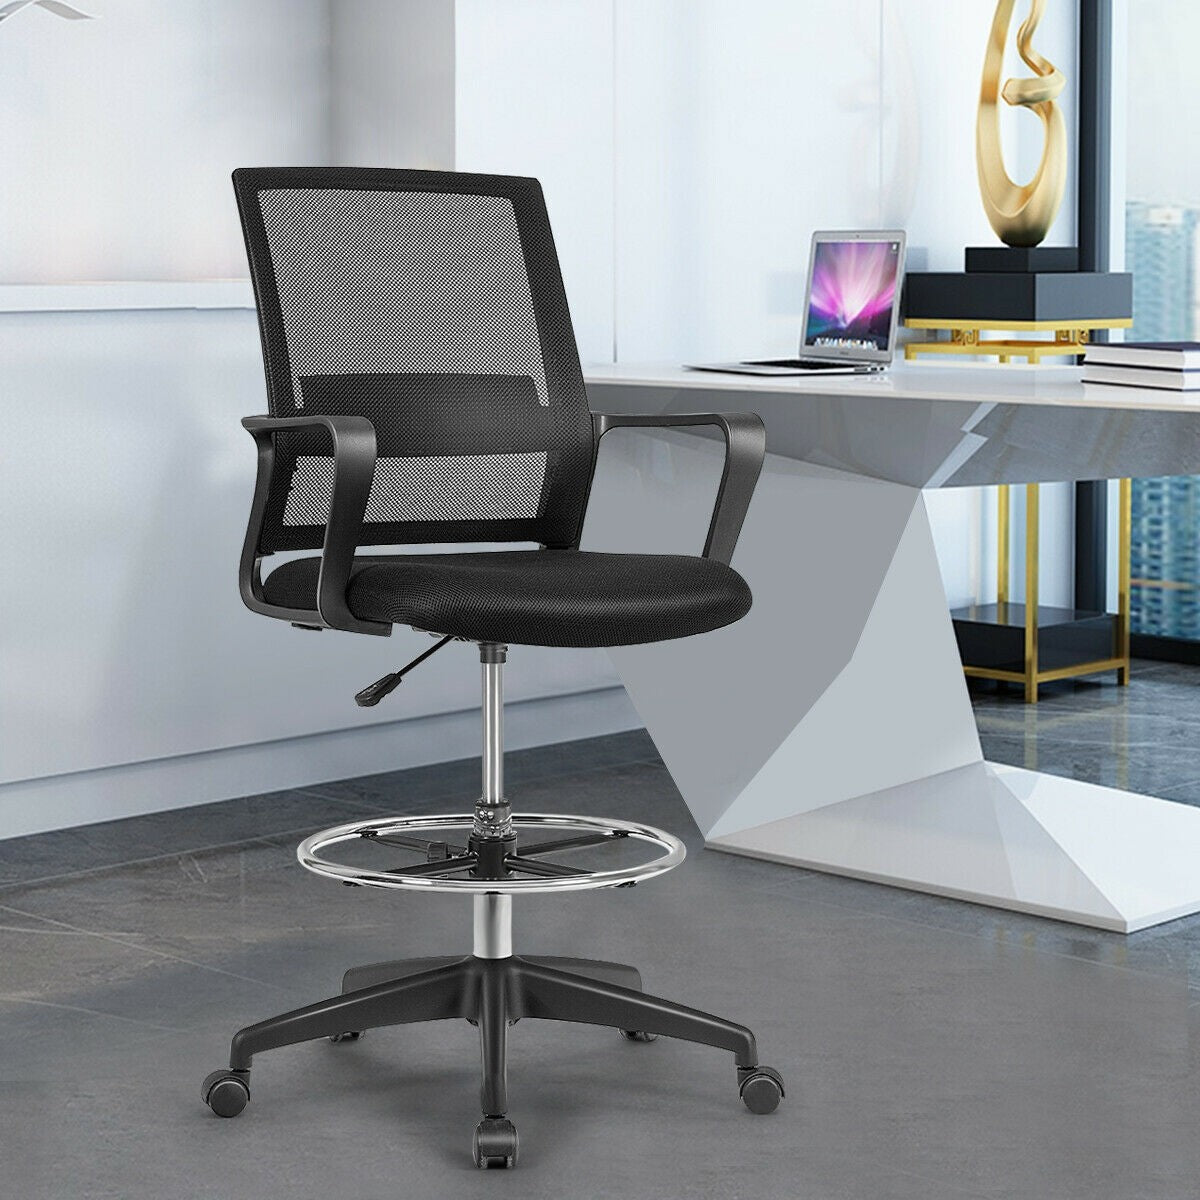 Mesh Drafting Chair, Tall Office Chair with Adjustable Foot Ring for Standing Desk